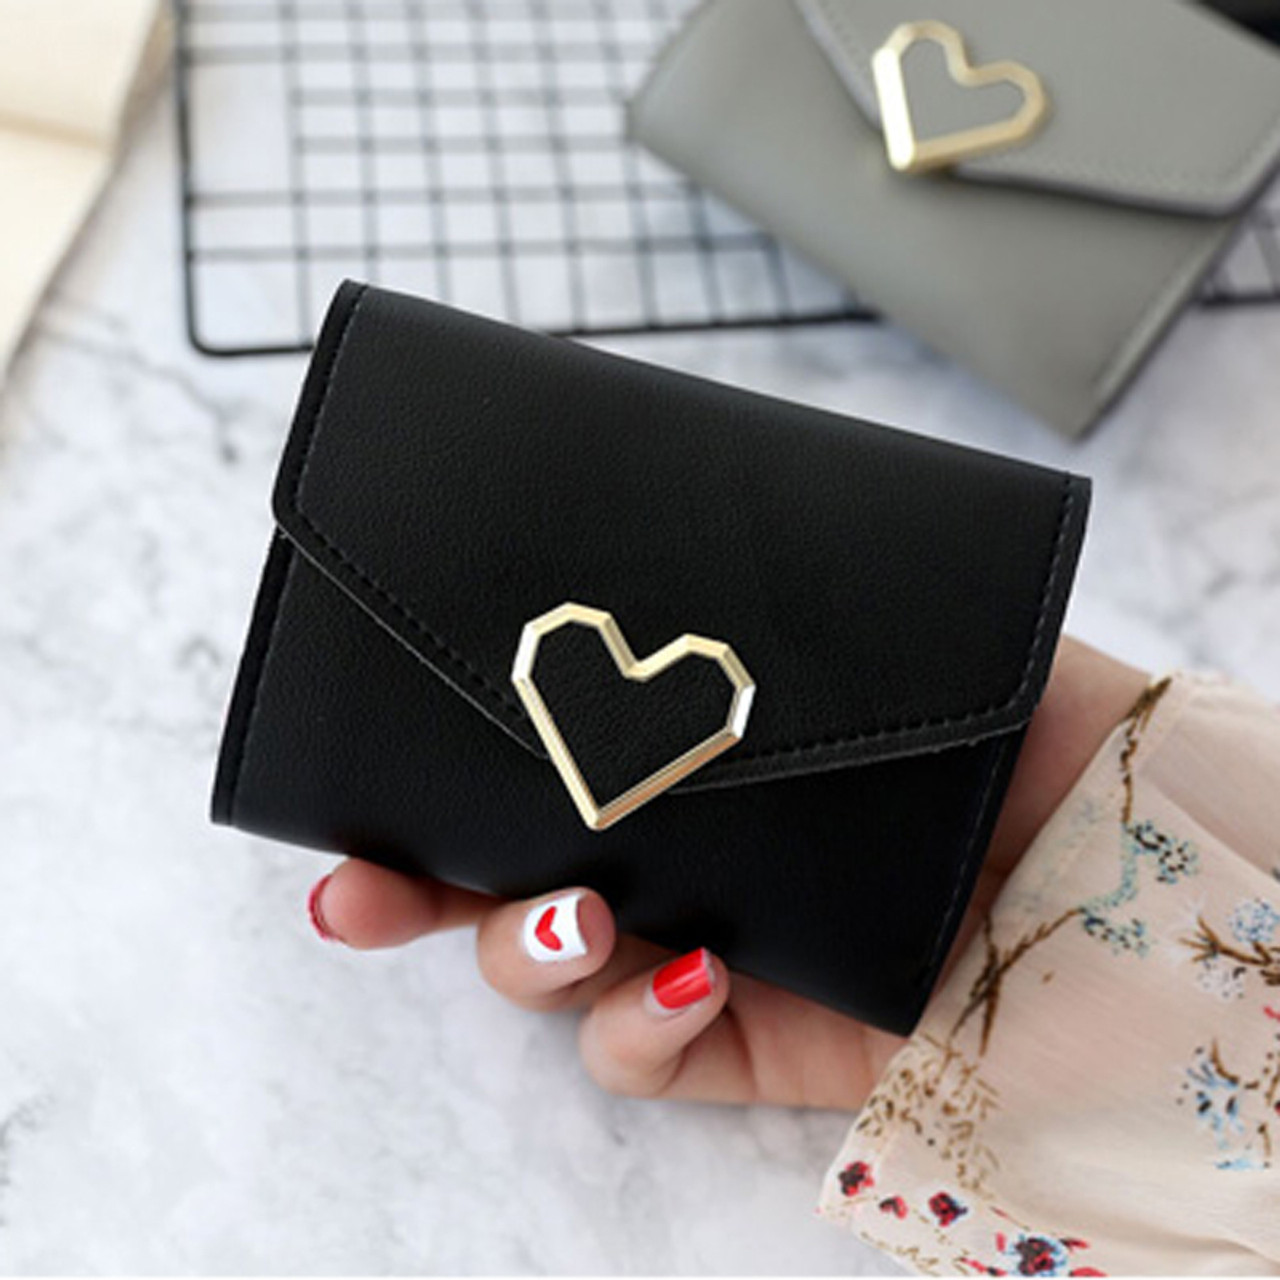 Versatile Solid Color Mini Wallet For Women For Women Small, 30% Short,  Multifunctional With Card Slots From Bhandbagmarket, $11.18 | DHgate.Com